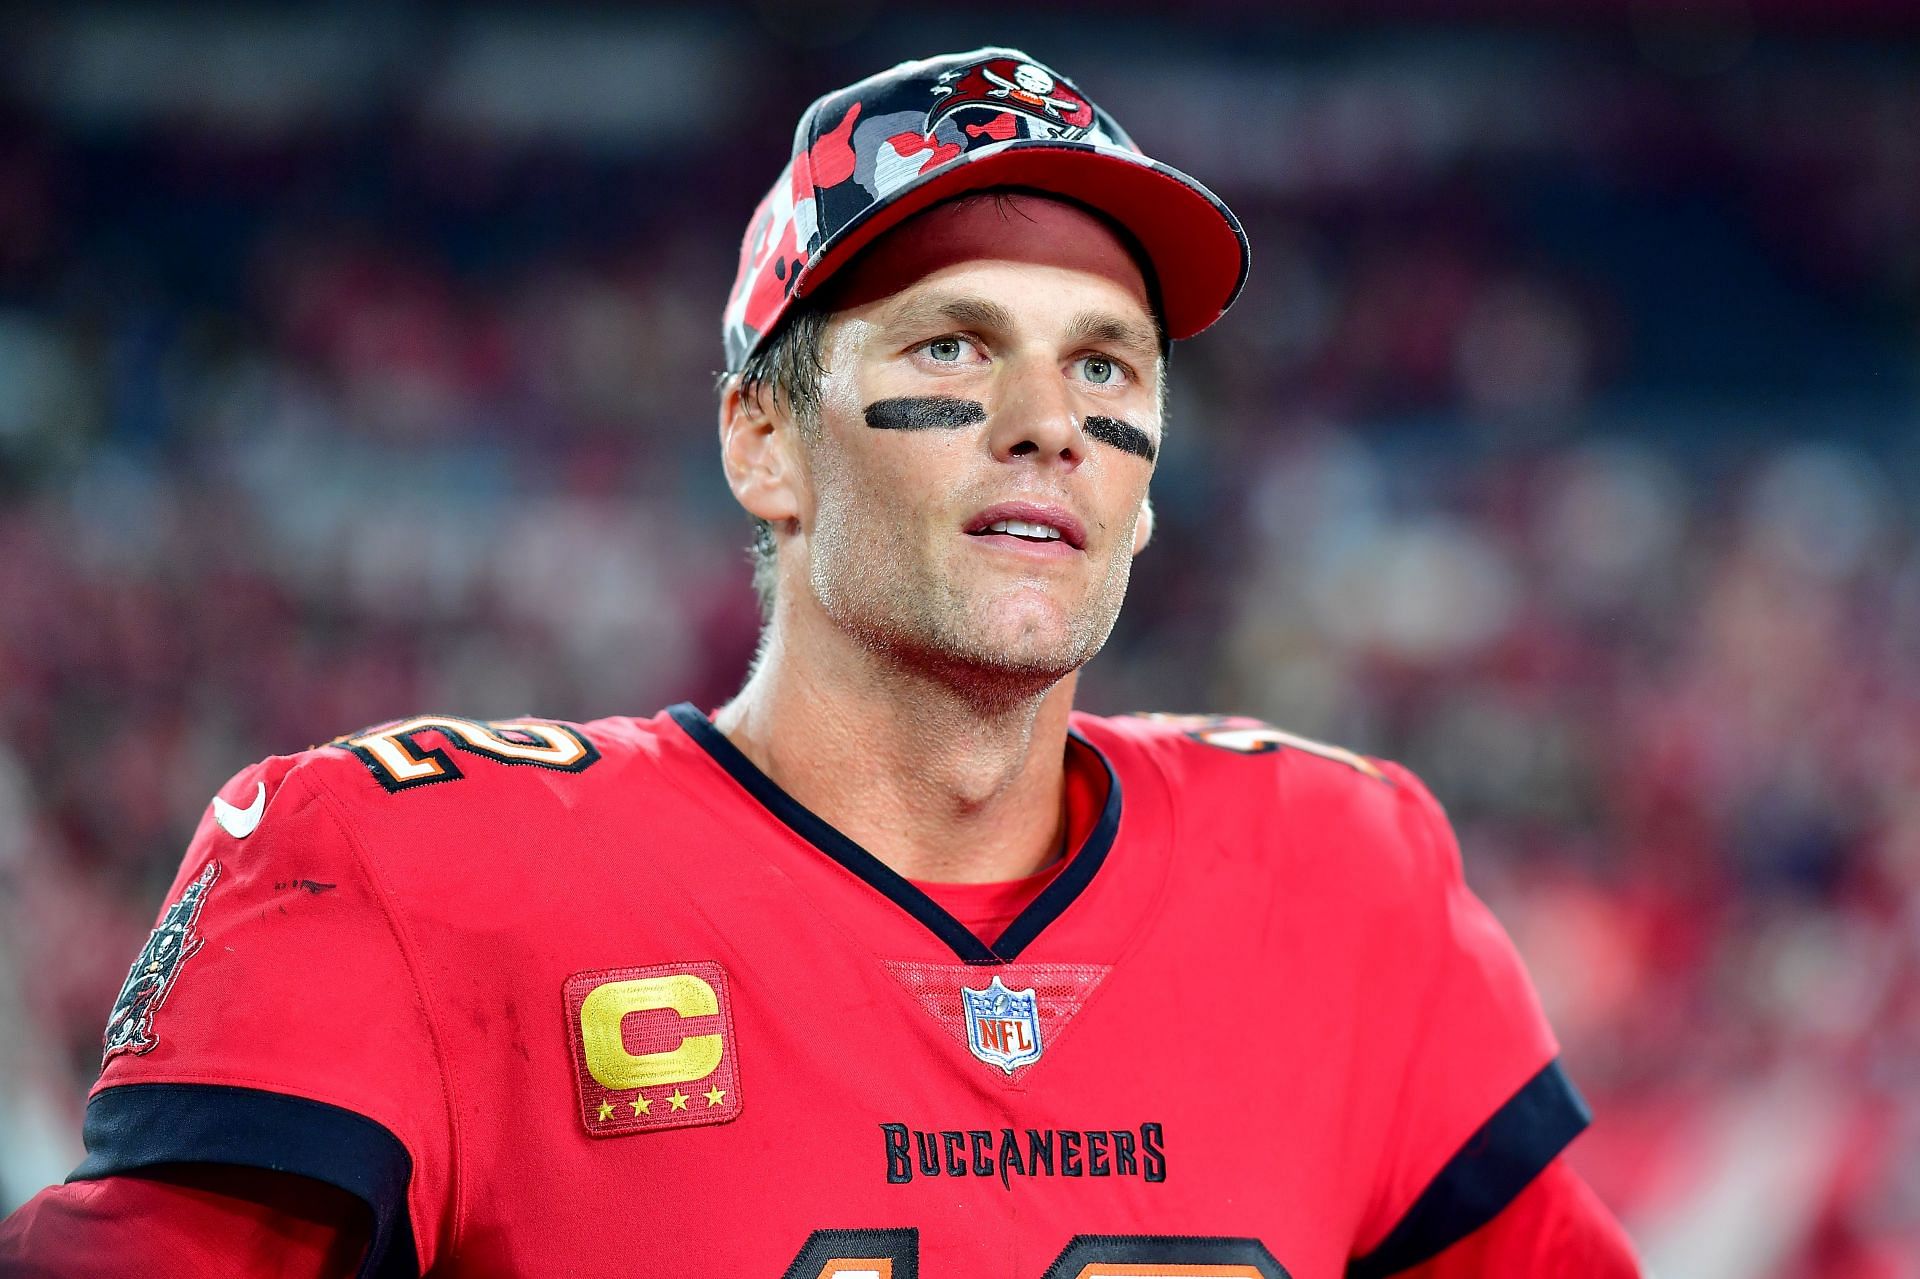 NFL fans blast Tom Brady over his bizarre ticket request for 49ers